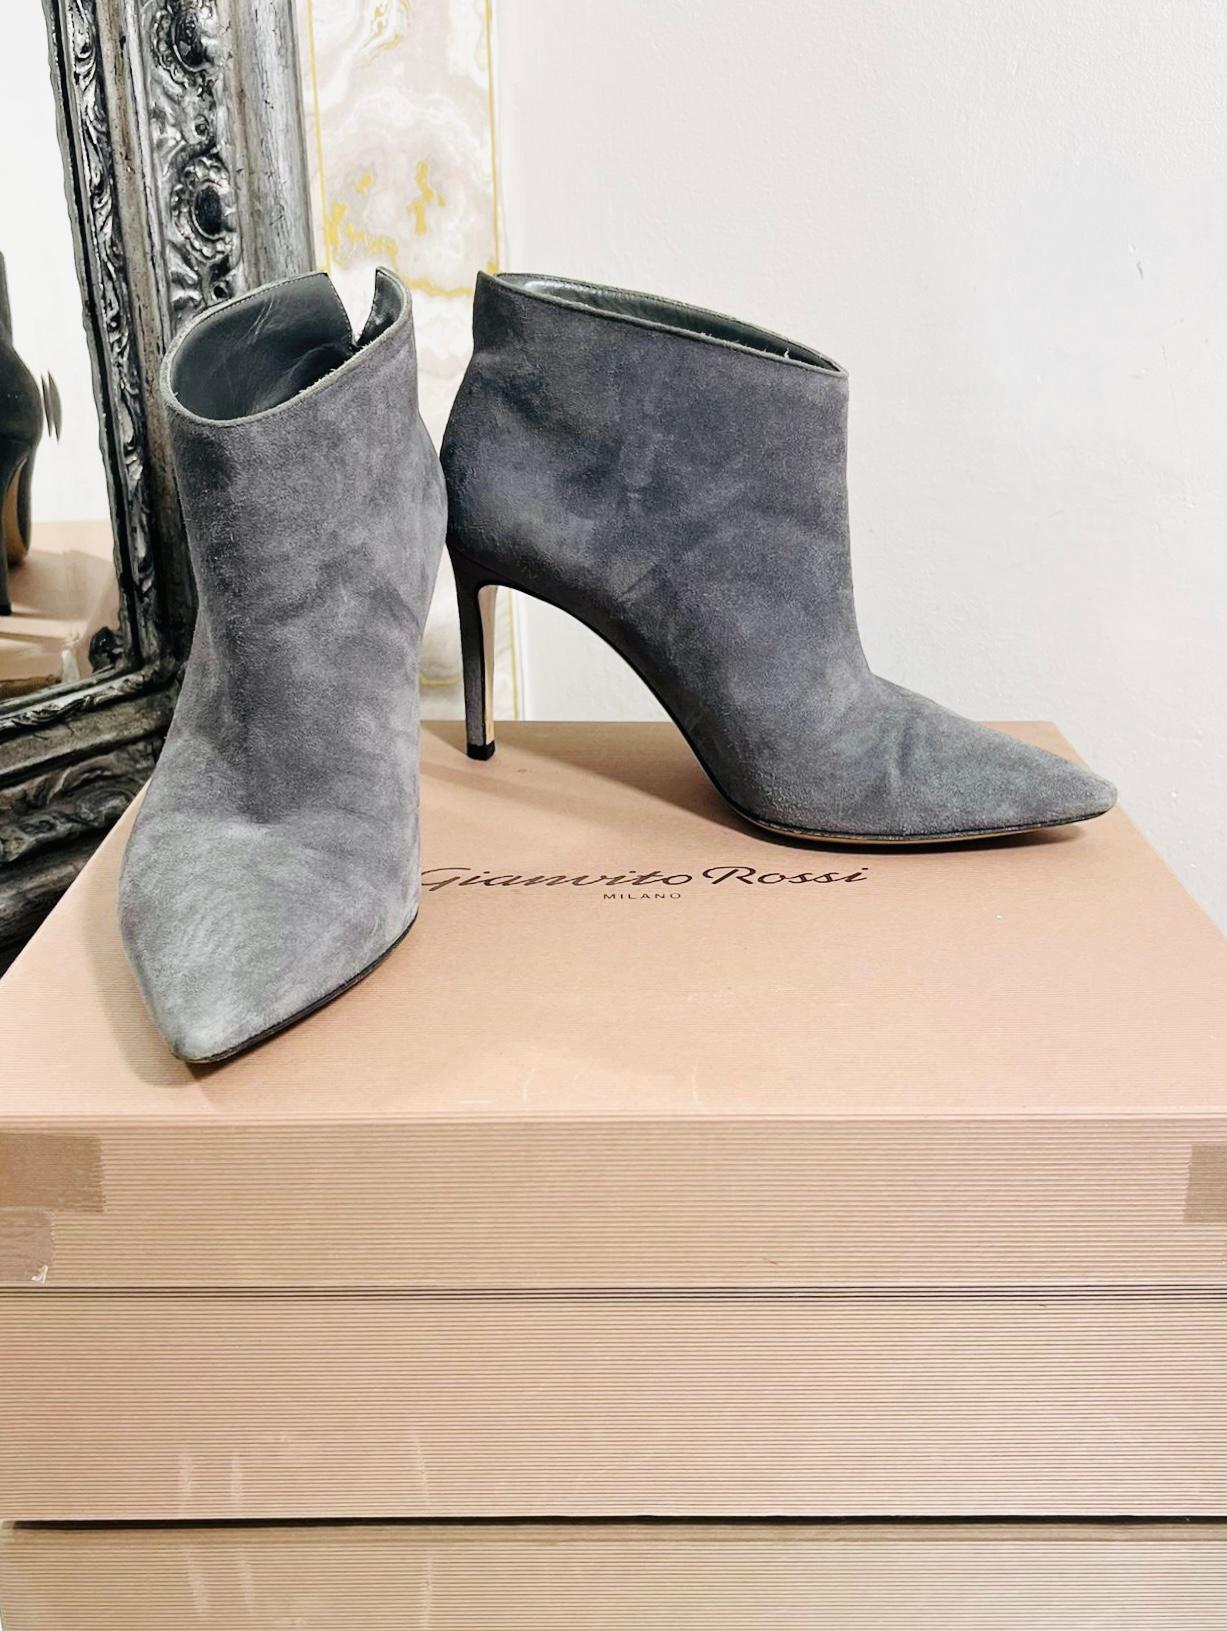 Gianvito Rossi Suede Ankle Boots

Grey boots designed with a pointed toe and stiletto heel.

Featuring slip-on style, slit detail to rear and leather lining.

Size – 35.5

Condition – Good (General signs of wear, scratch to the heel)

Composition –